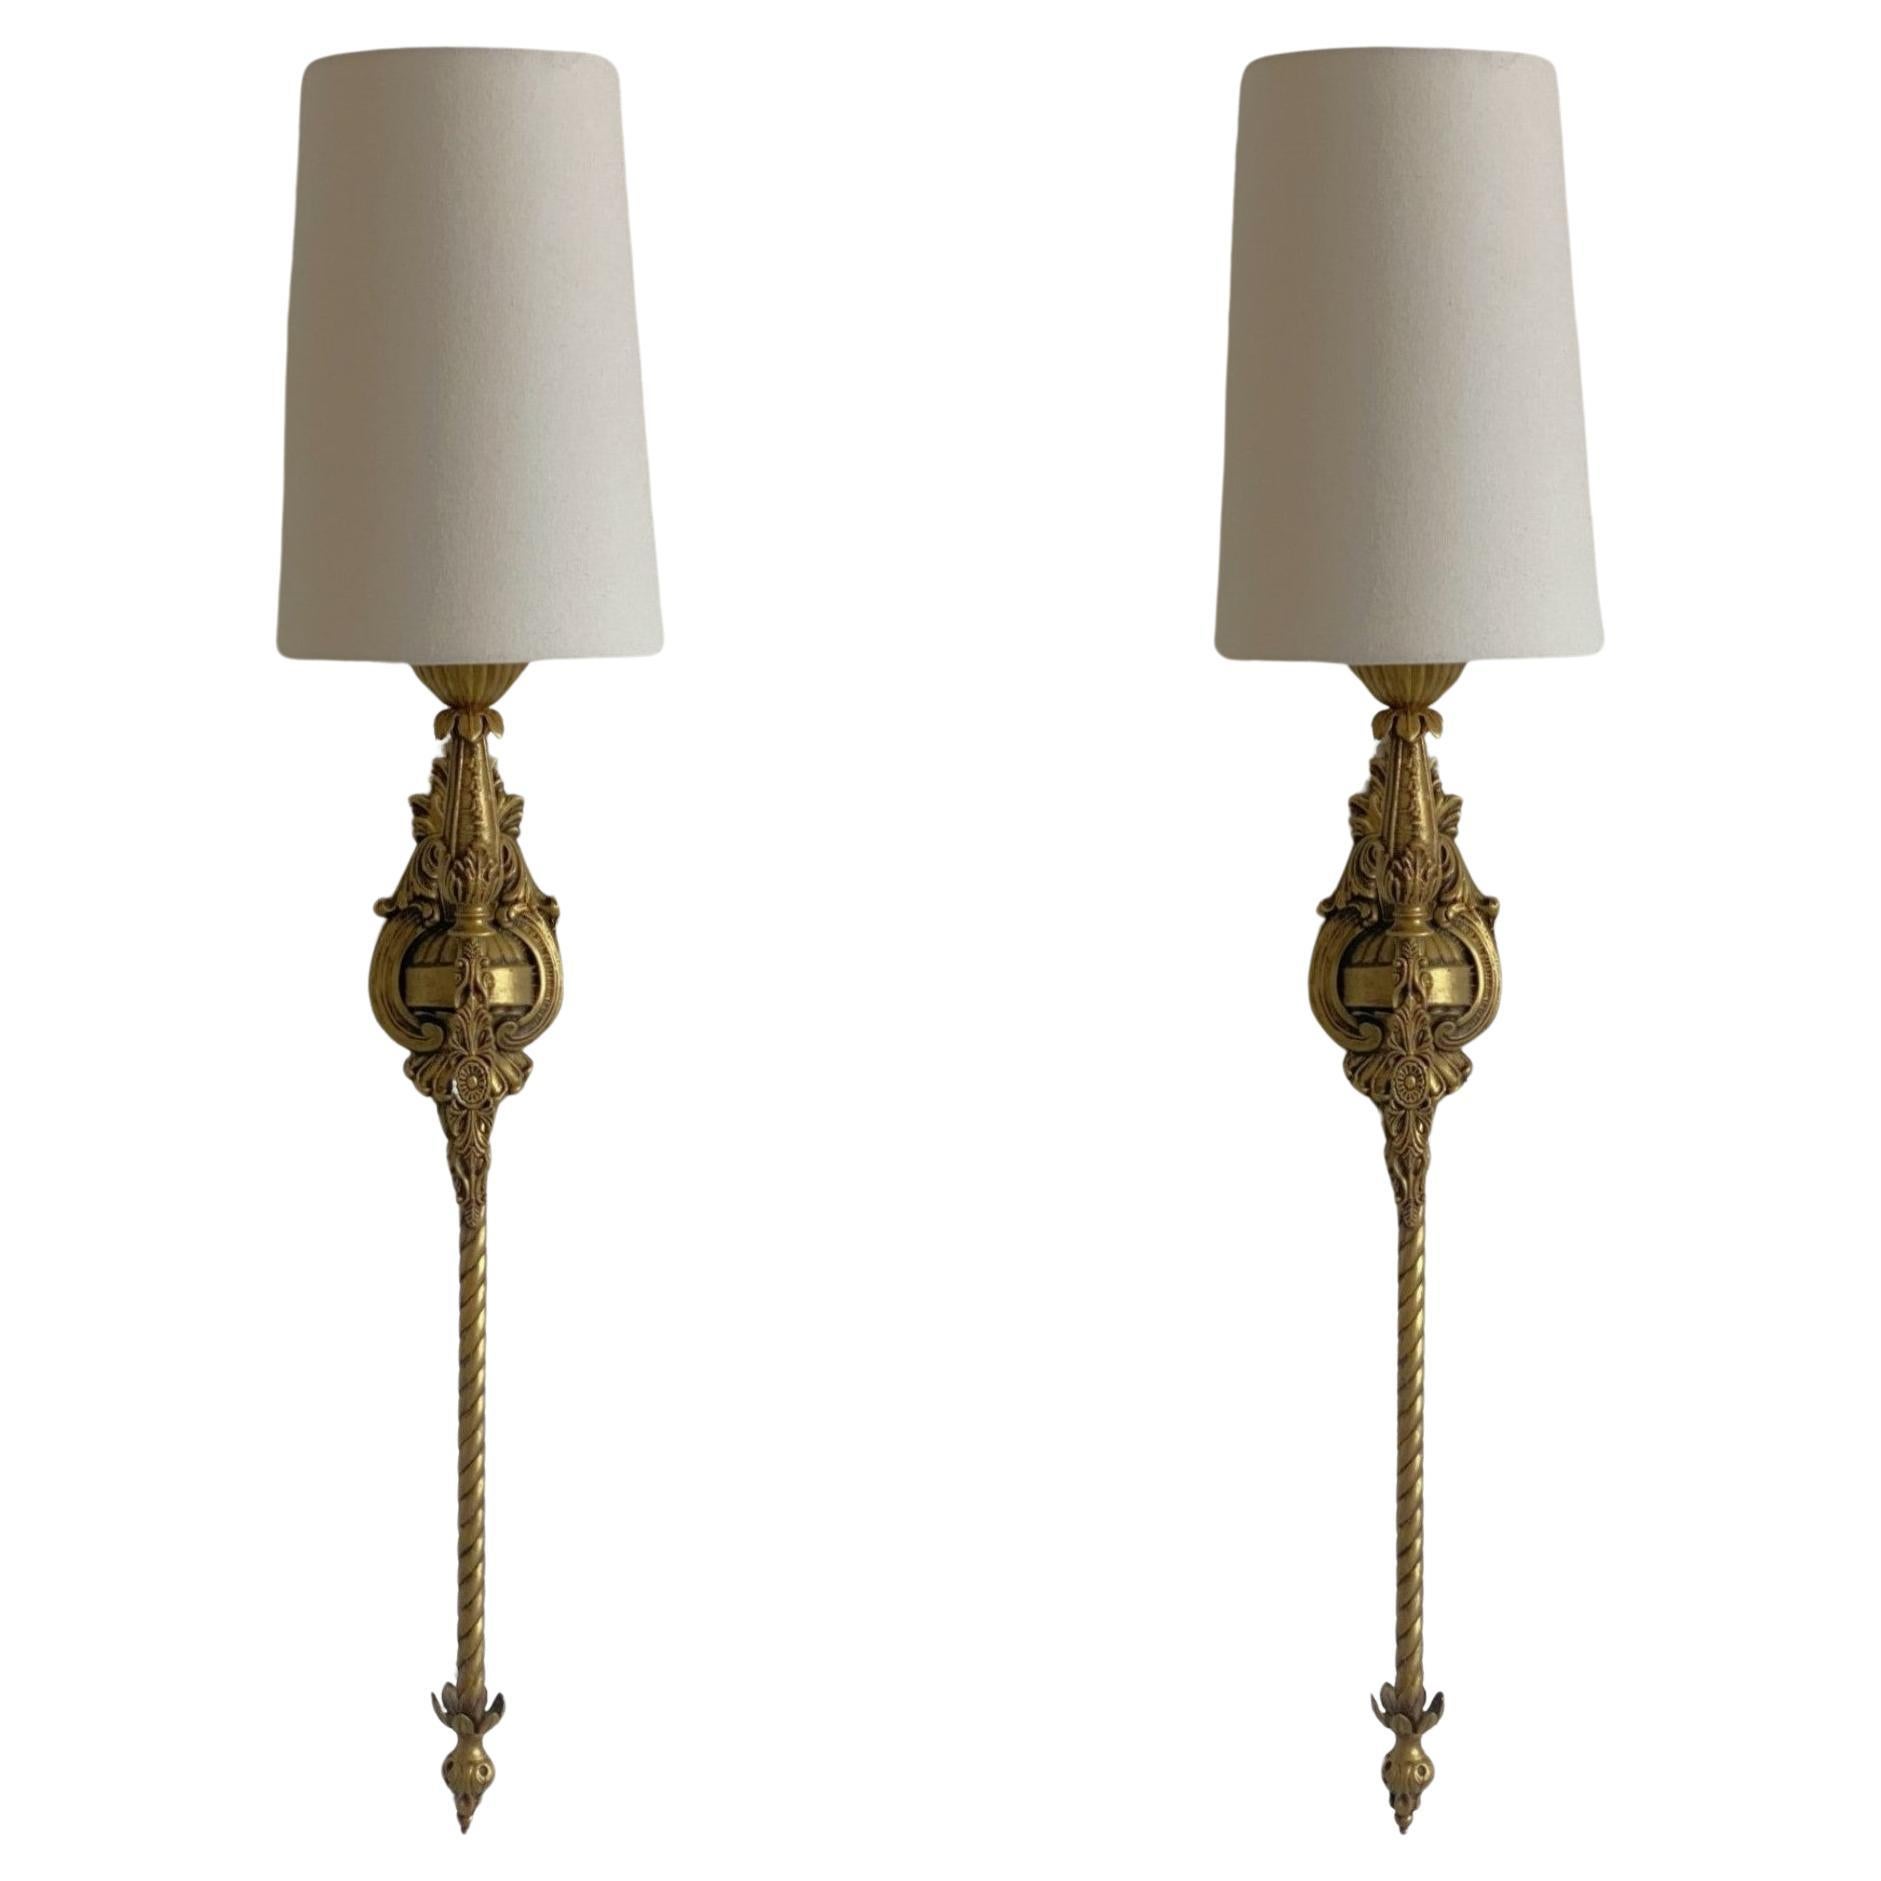 Pair of French Art Deco Torchiere Wall Sconces Converted to Electric Wall lights